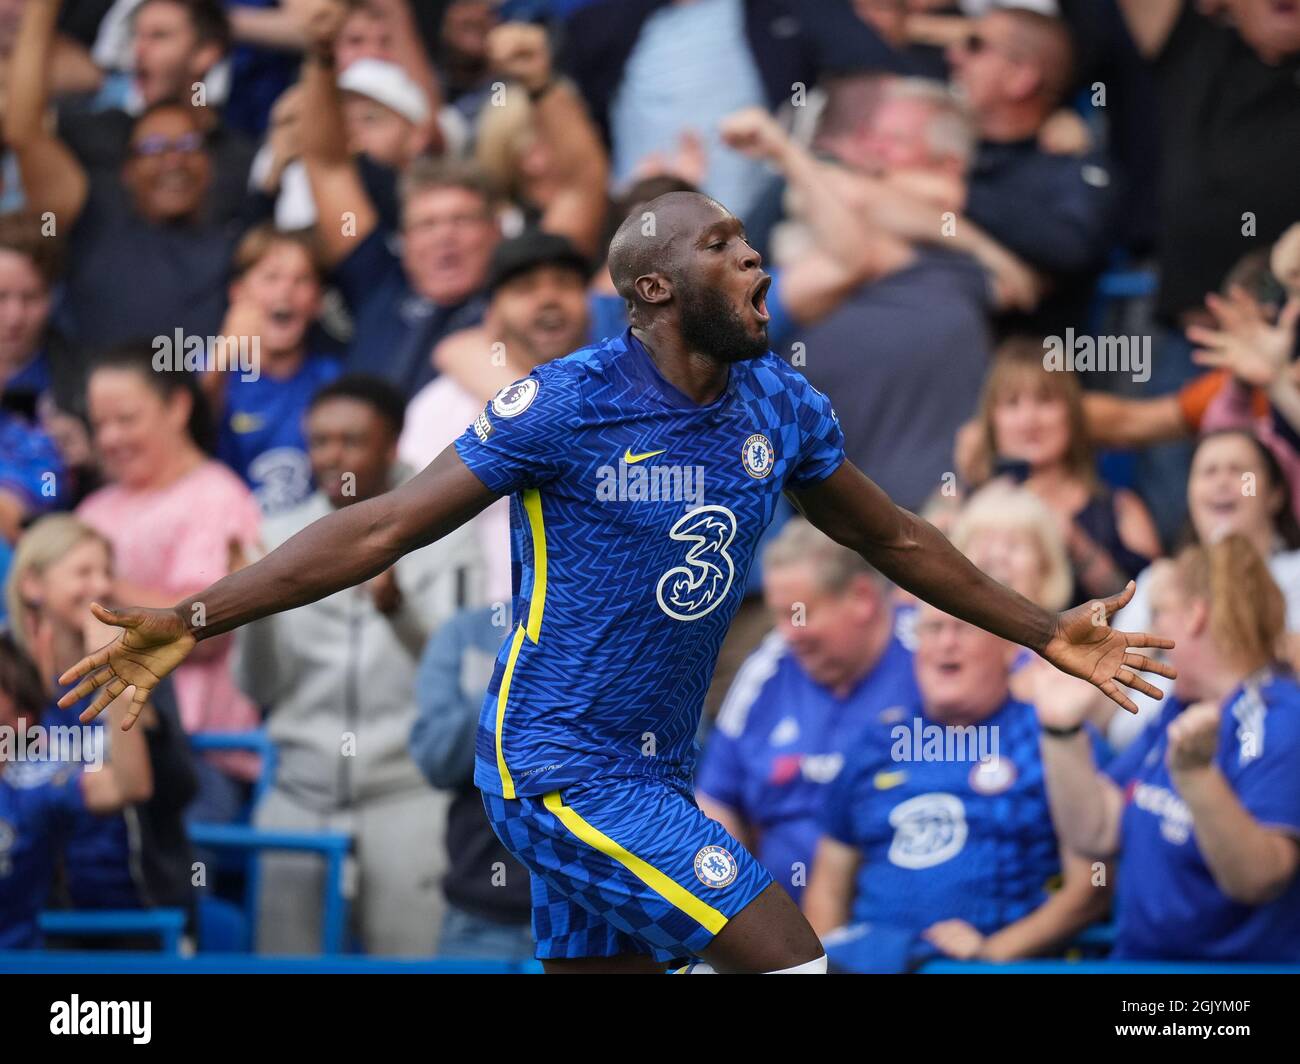 London, UK. 11th Sep, 2021. Romelu Lukaku of Chelsea celebrates scoring his first goal during the Premier League match between Chelsea and Aston Villa at Stamford Bridge, London, England on 11 September 2021. Photo by Andy Rowland. Credit: PRiME Media Images/Alamy Live News Credit: PRiME Media Images/Alamy Live News Stock Photo